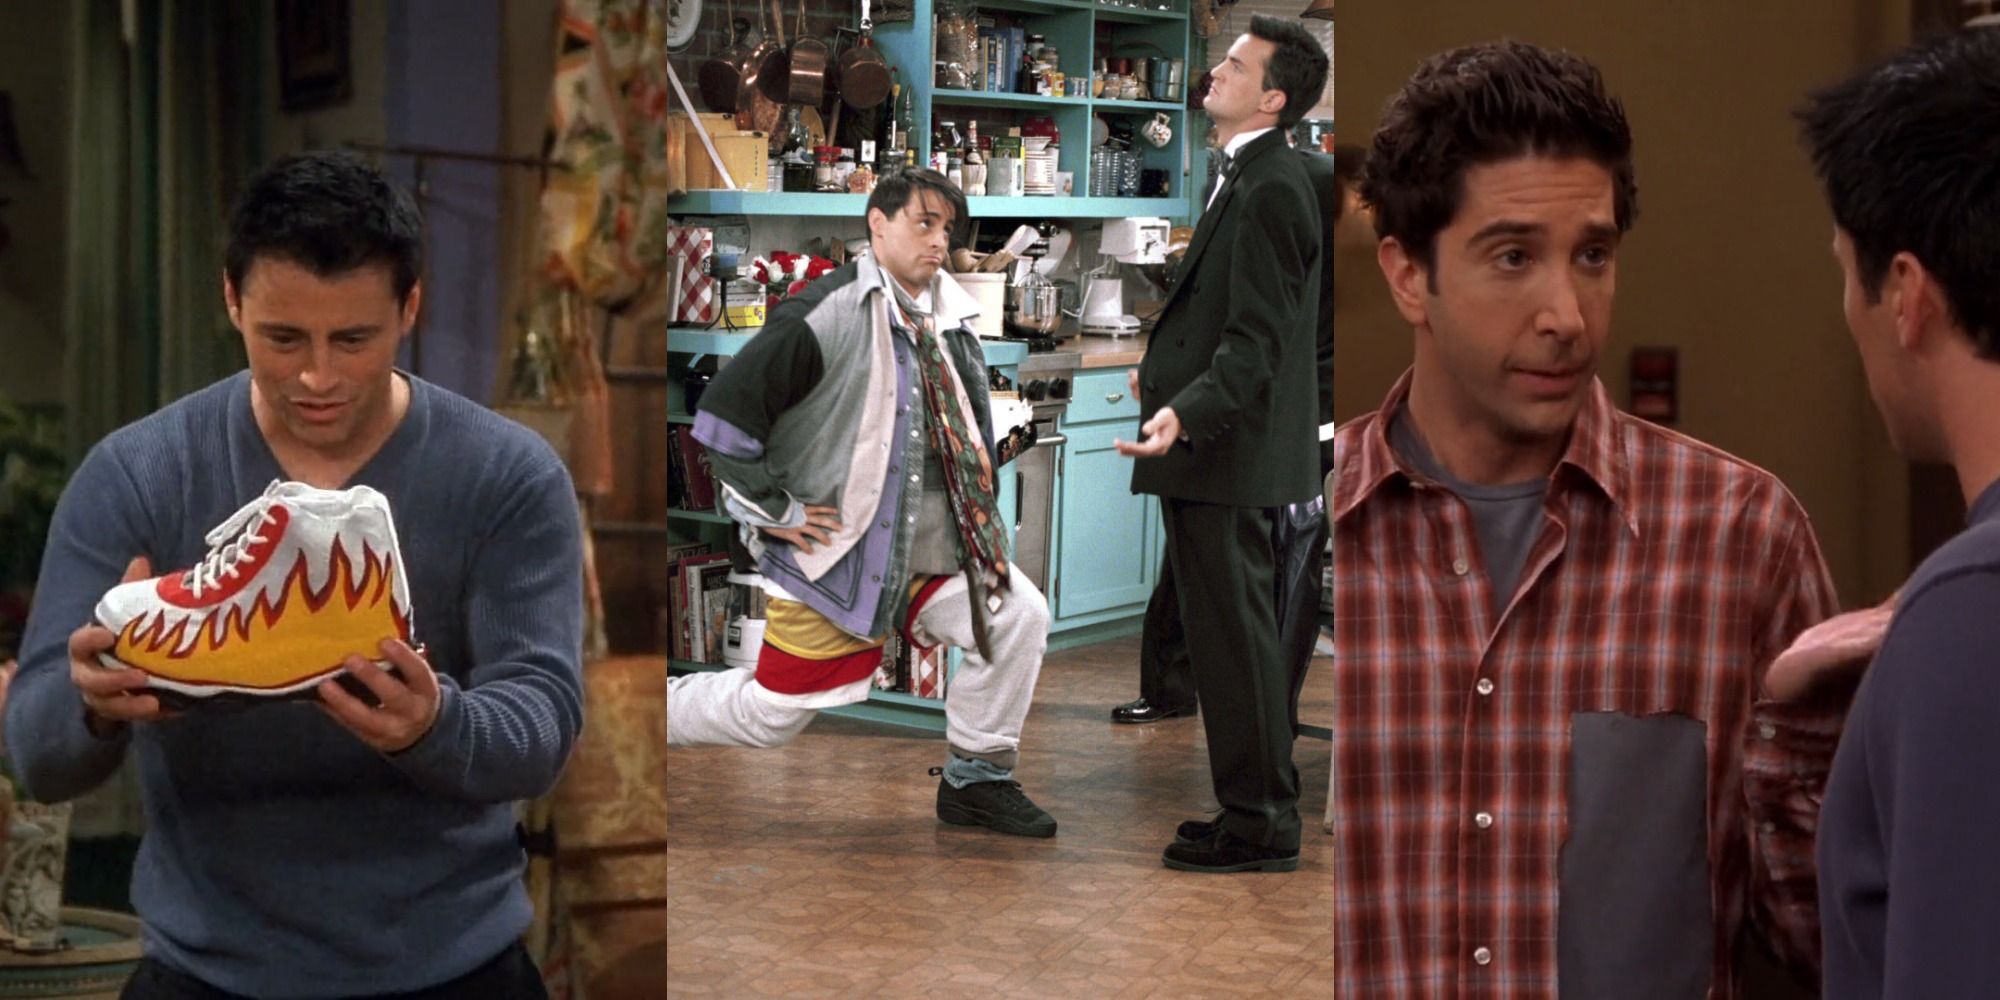 Main feature image showing Joey and Ross In Friends